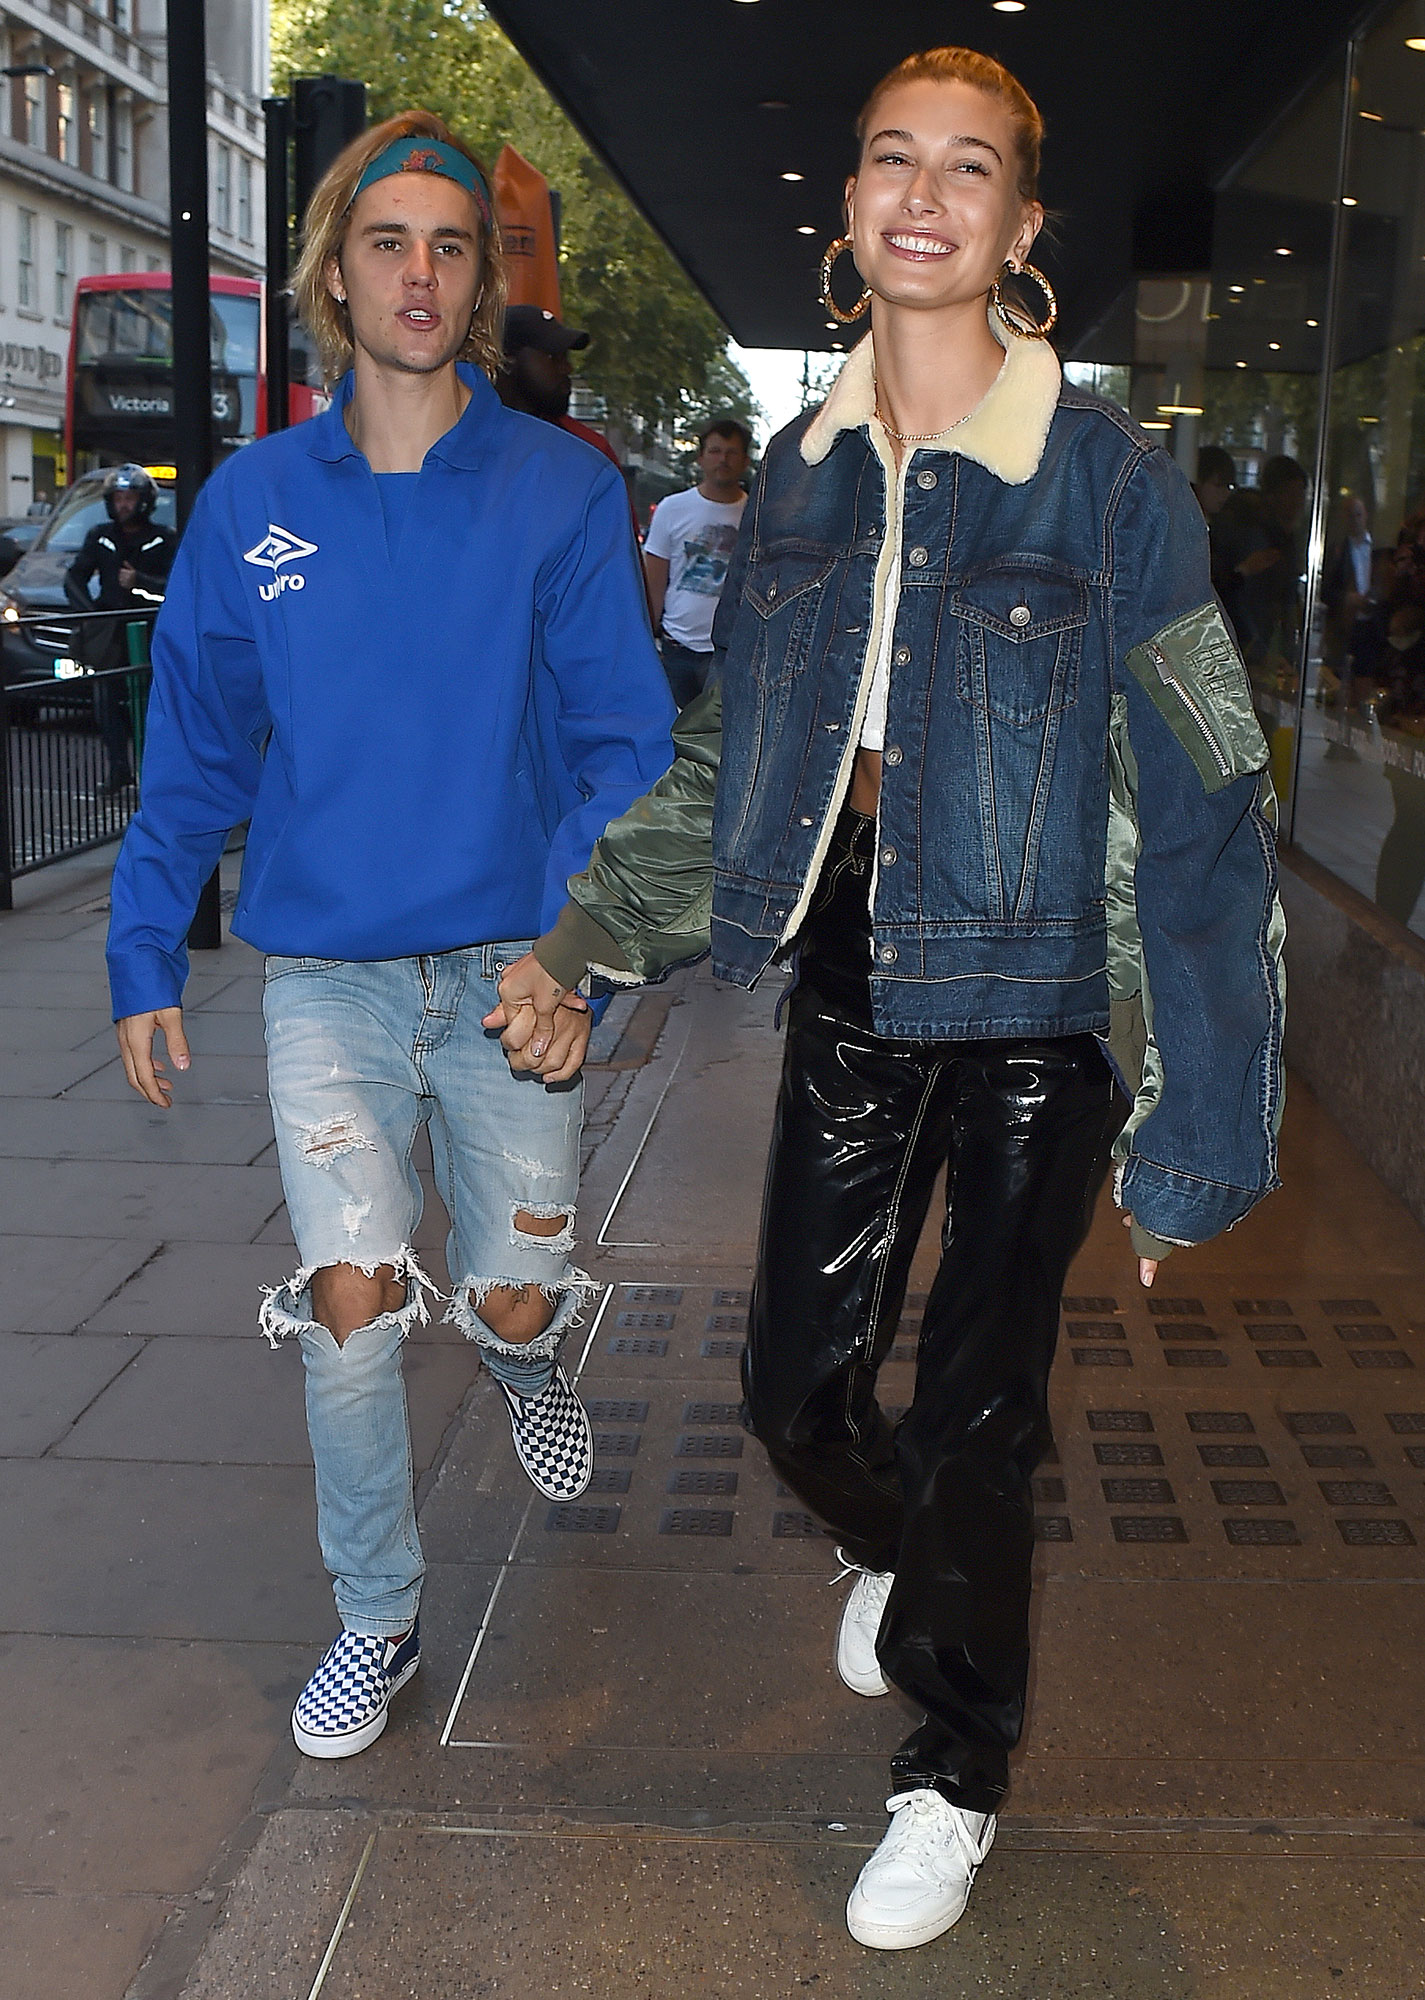 Justin Bieber Gets Crafty, Makes Wife Hailey Baldwin a Necklace ...